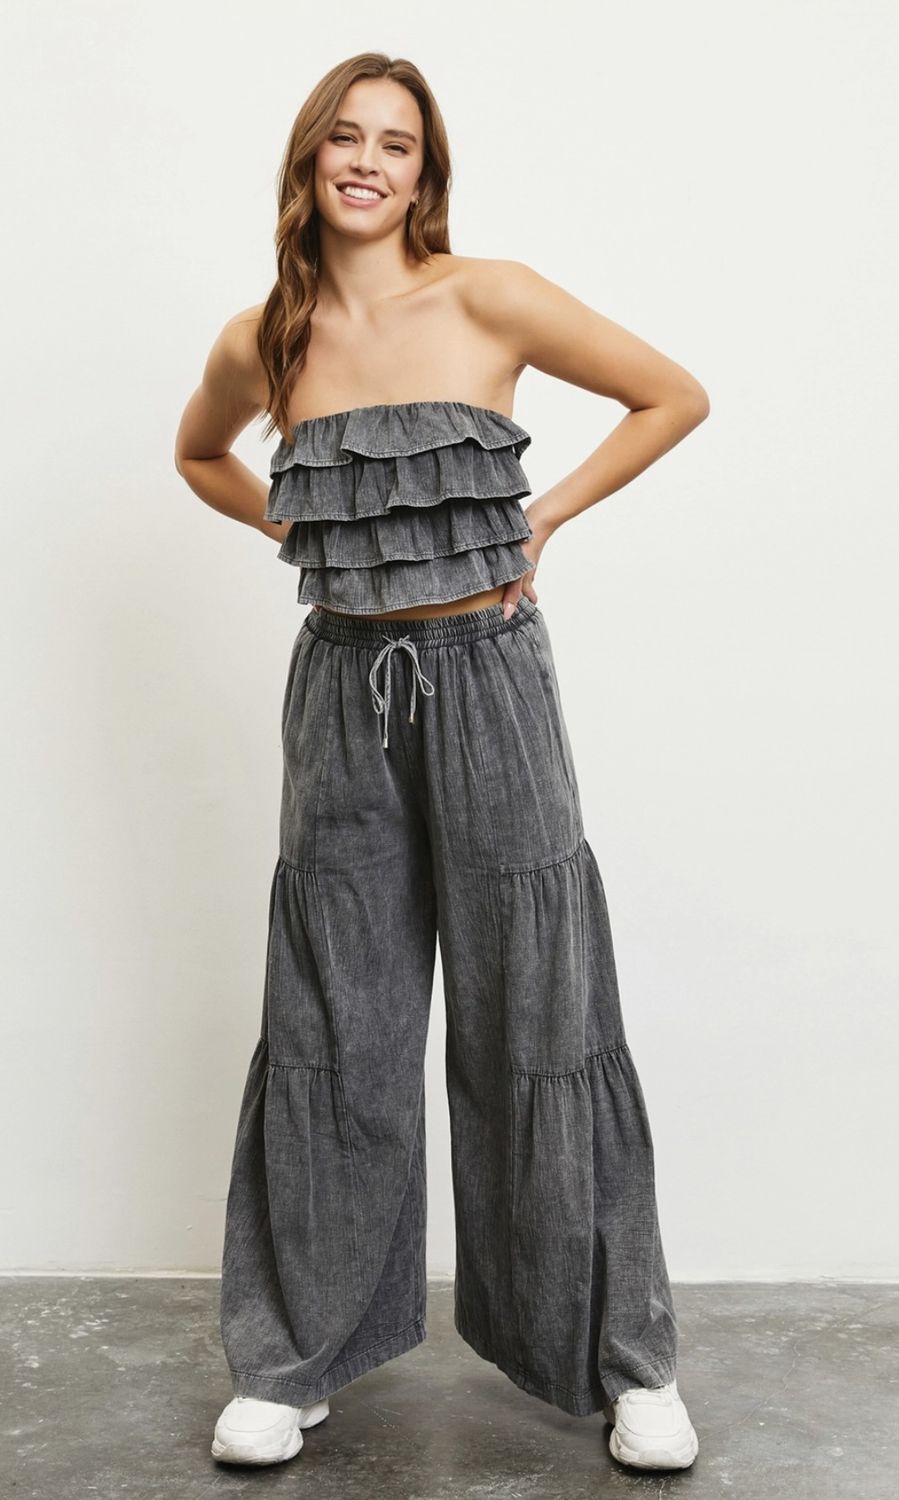 DS0624 Mustard Seed wide leg tiered pants, color: charcoal, Size: S